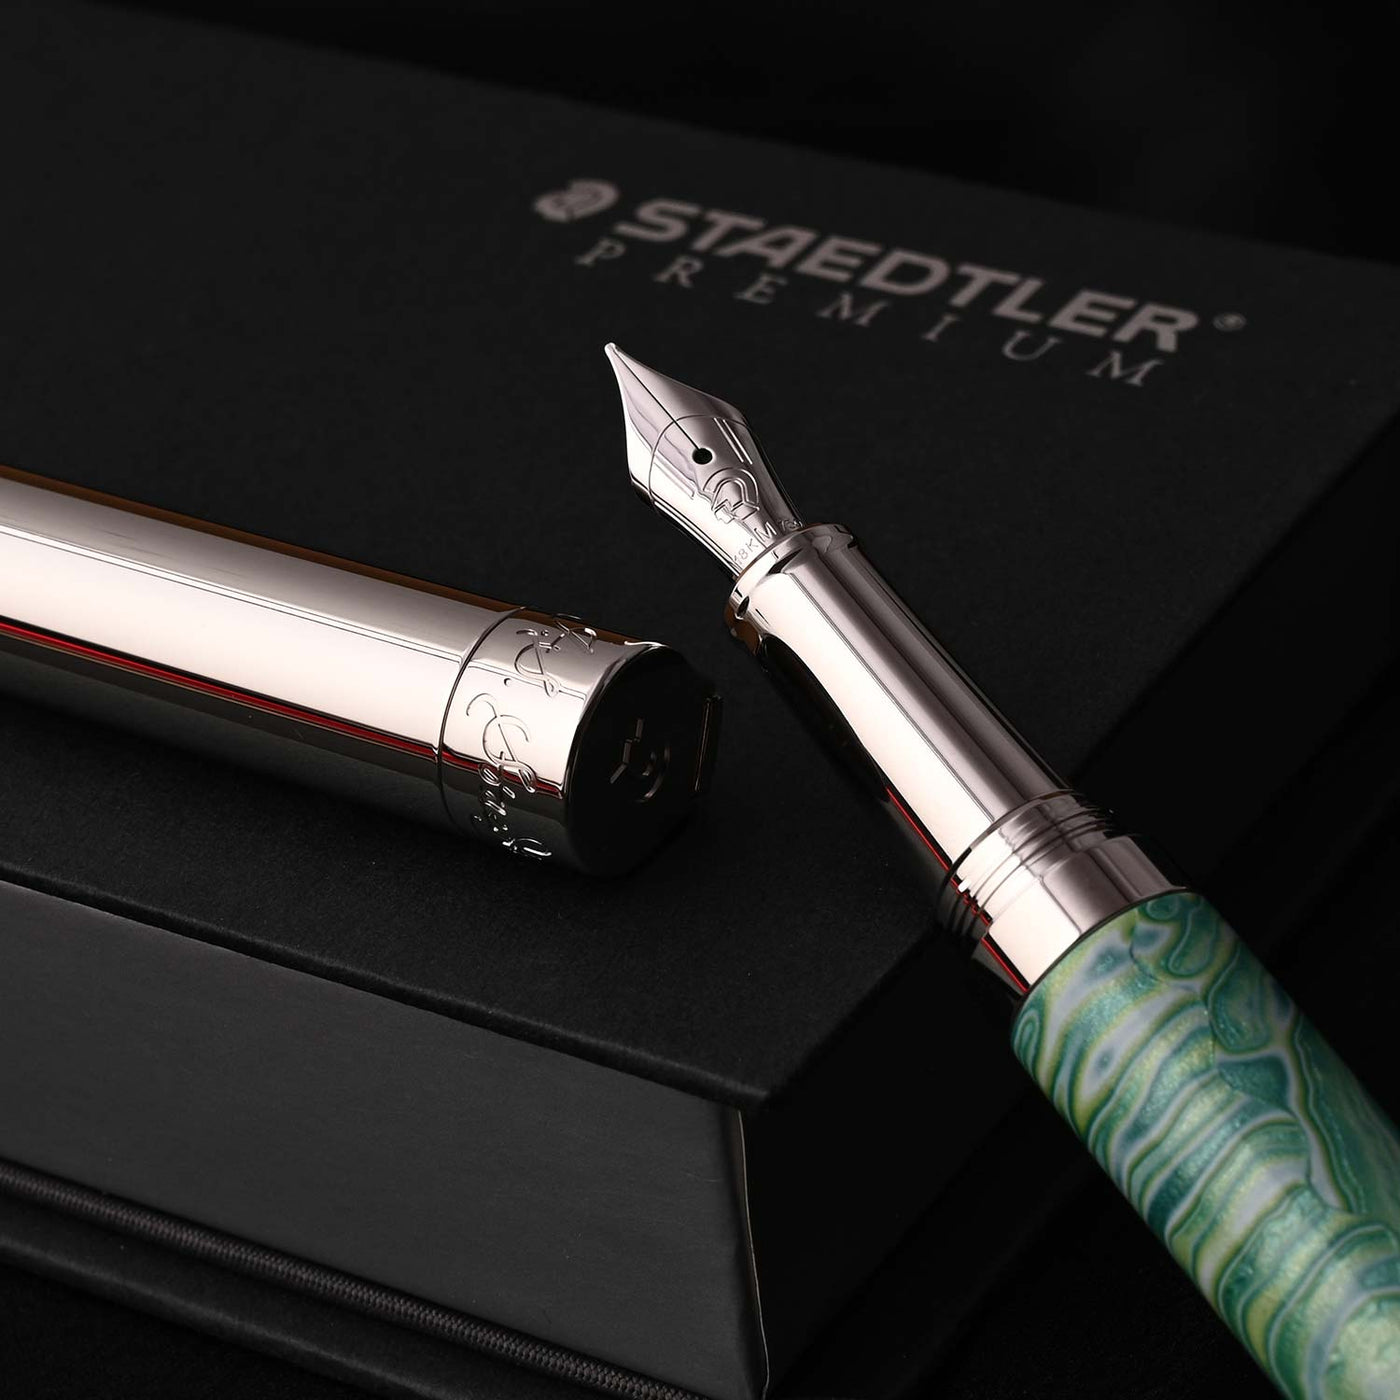 Staedtler Premium Pen of the Season Fountain Pen - Green CT (Limited Edition) 9